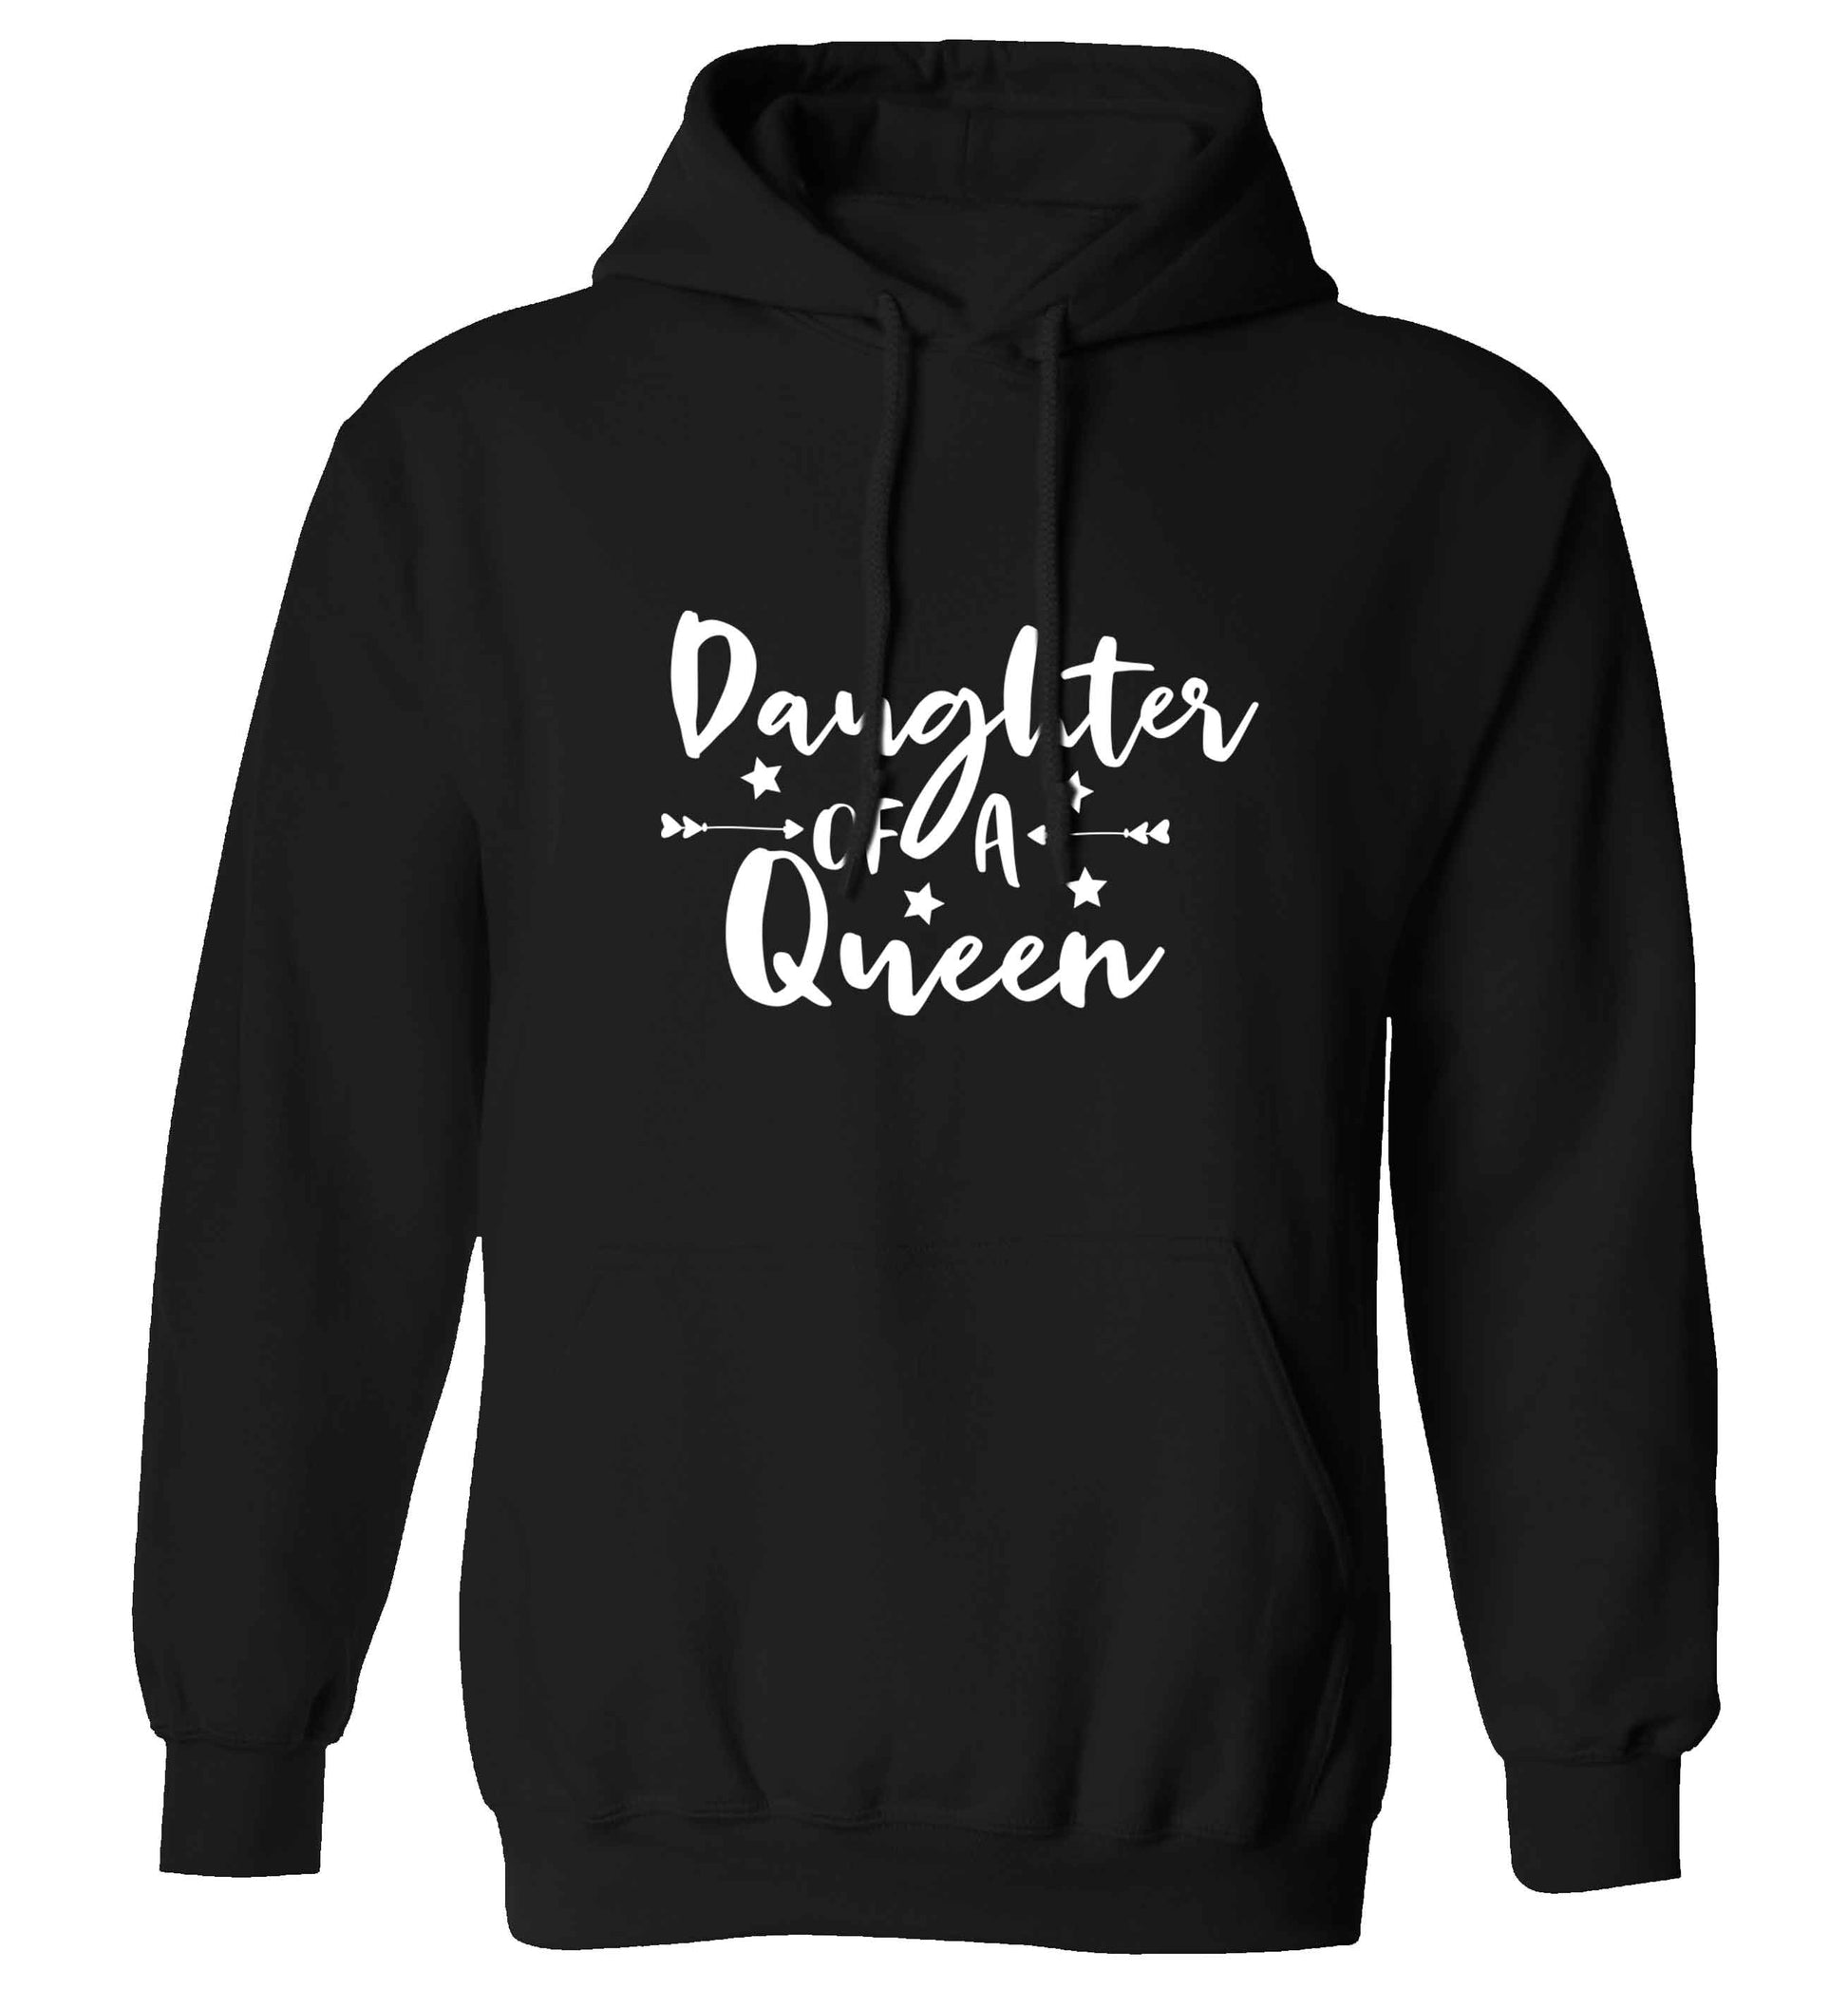 Daughter of a Queen adults unisex black hoodie 2XL